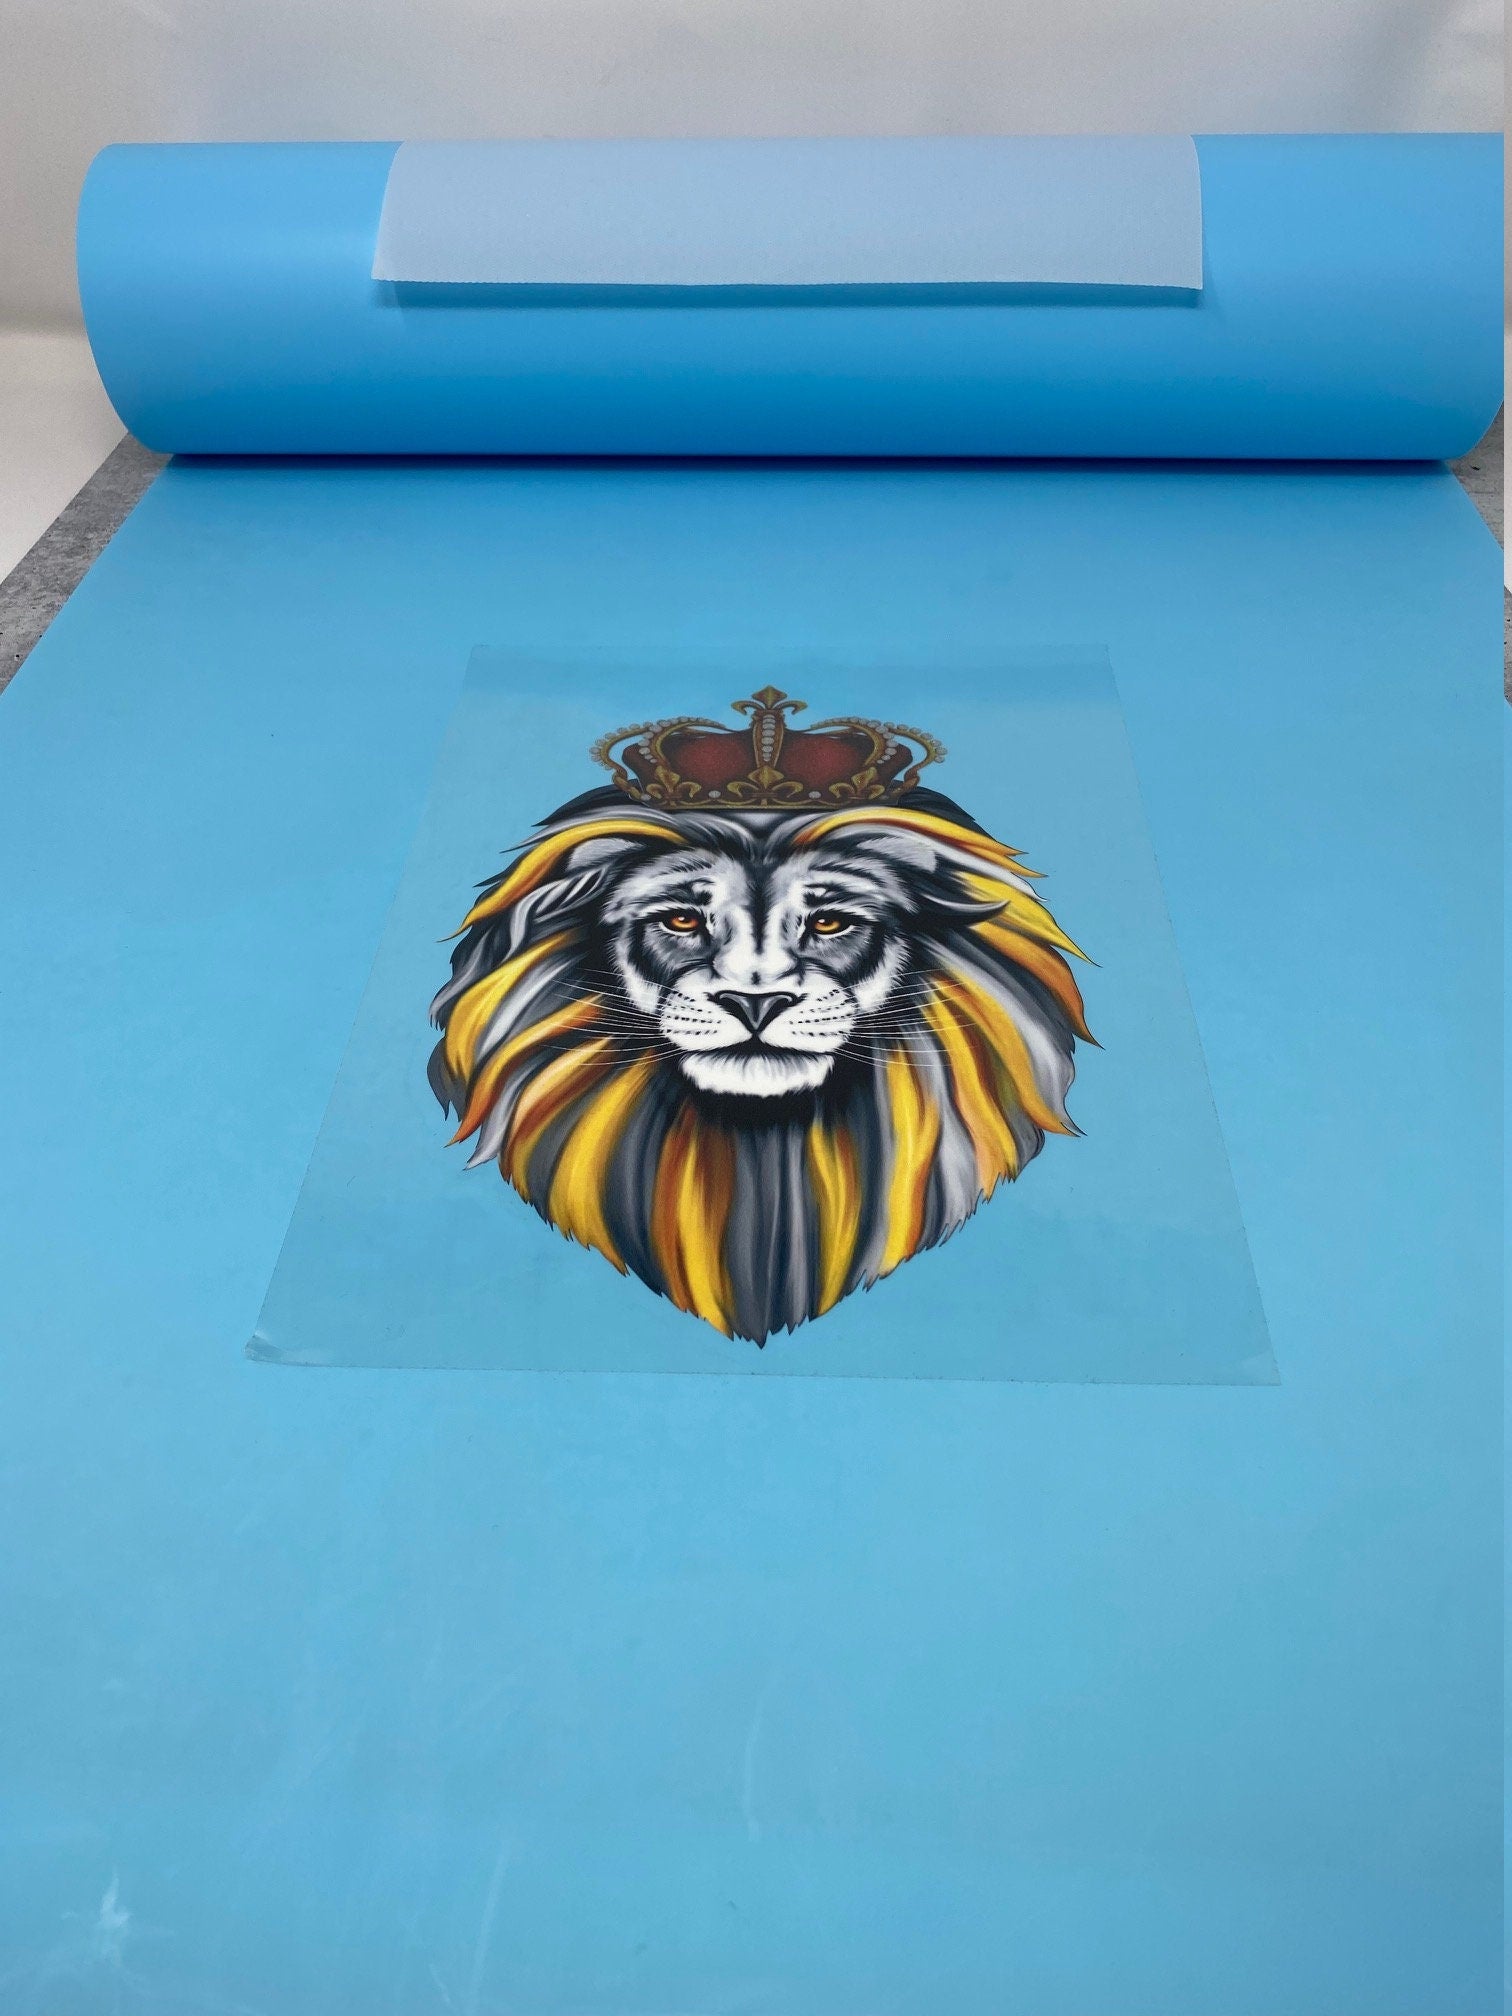 T-shirt Transfer Sheet, "Lion King"  for HEAT PRESSING on garments,T-Shirts, Sweaters, Htv Appliques, Etc.